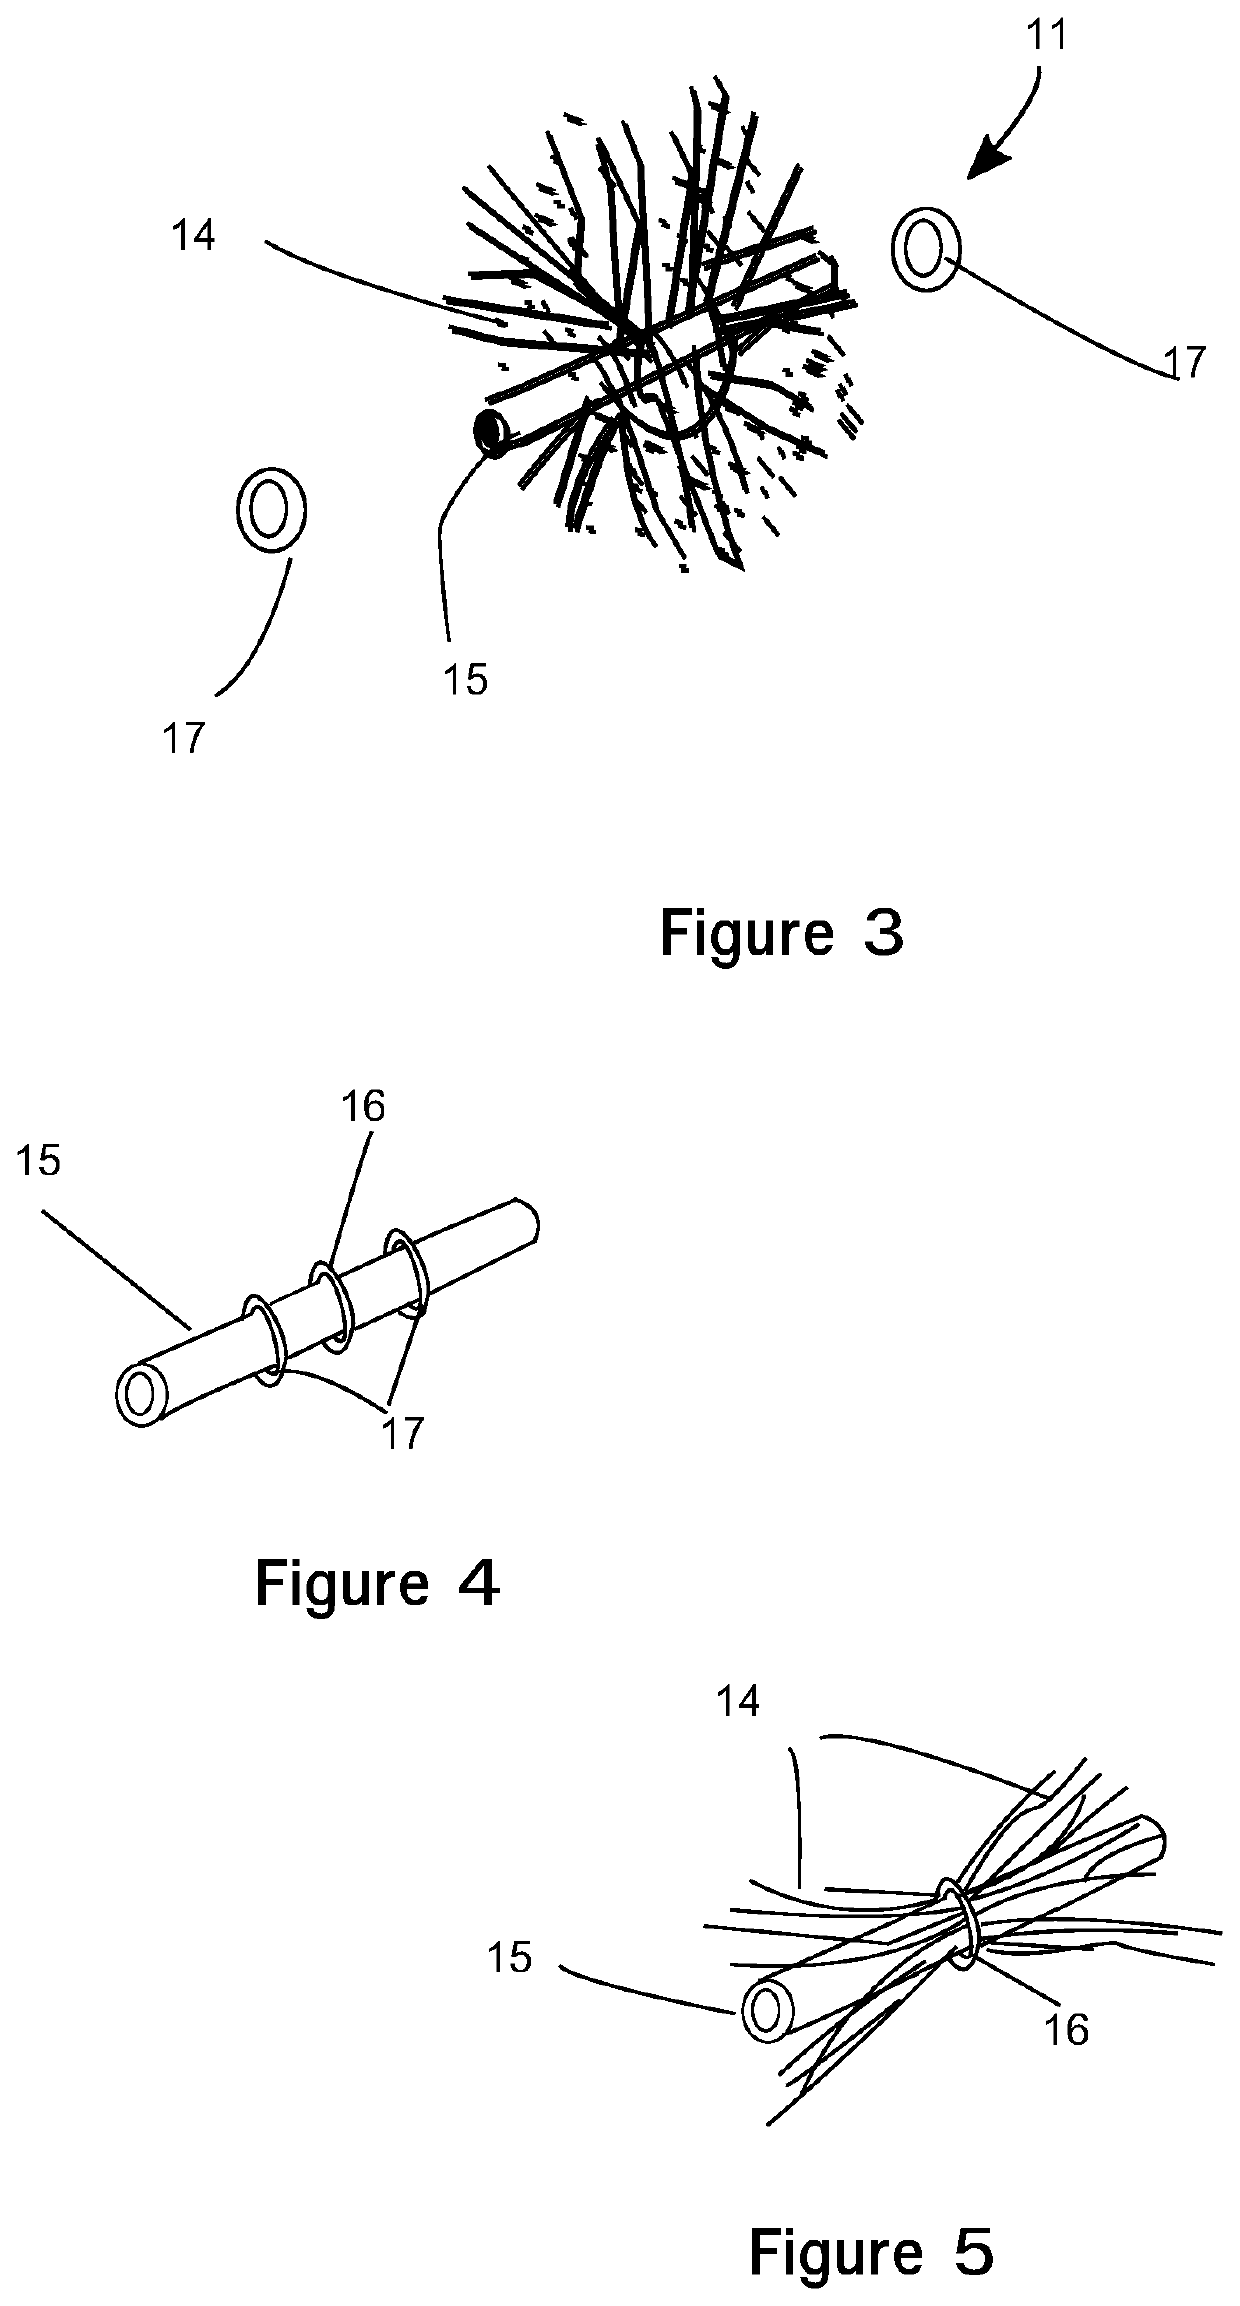 Fishing lure with a scent disbursement apparatus